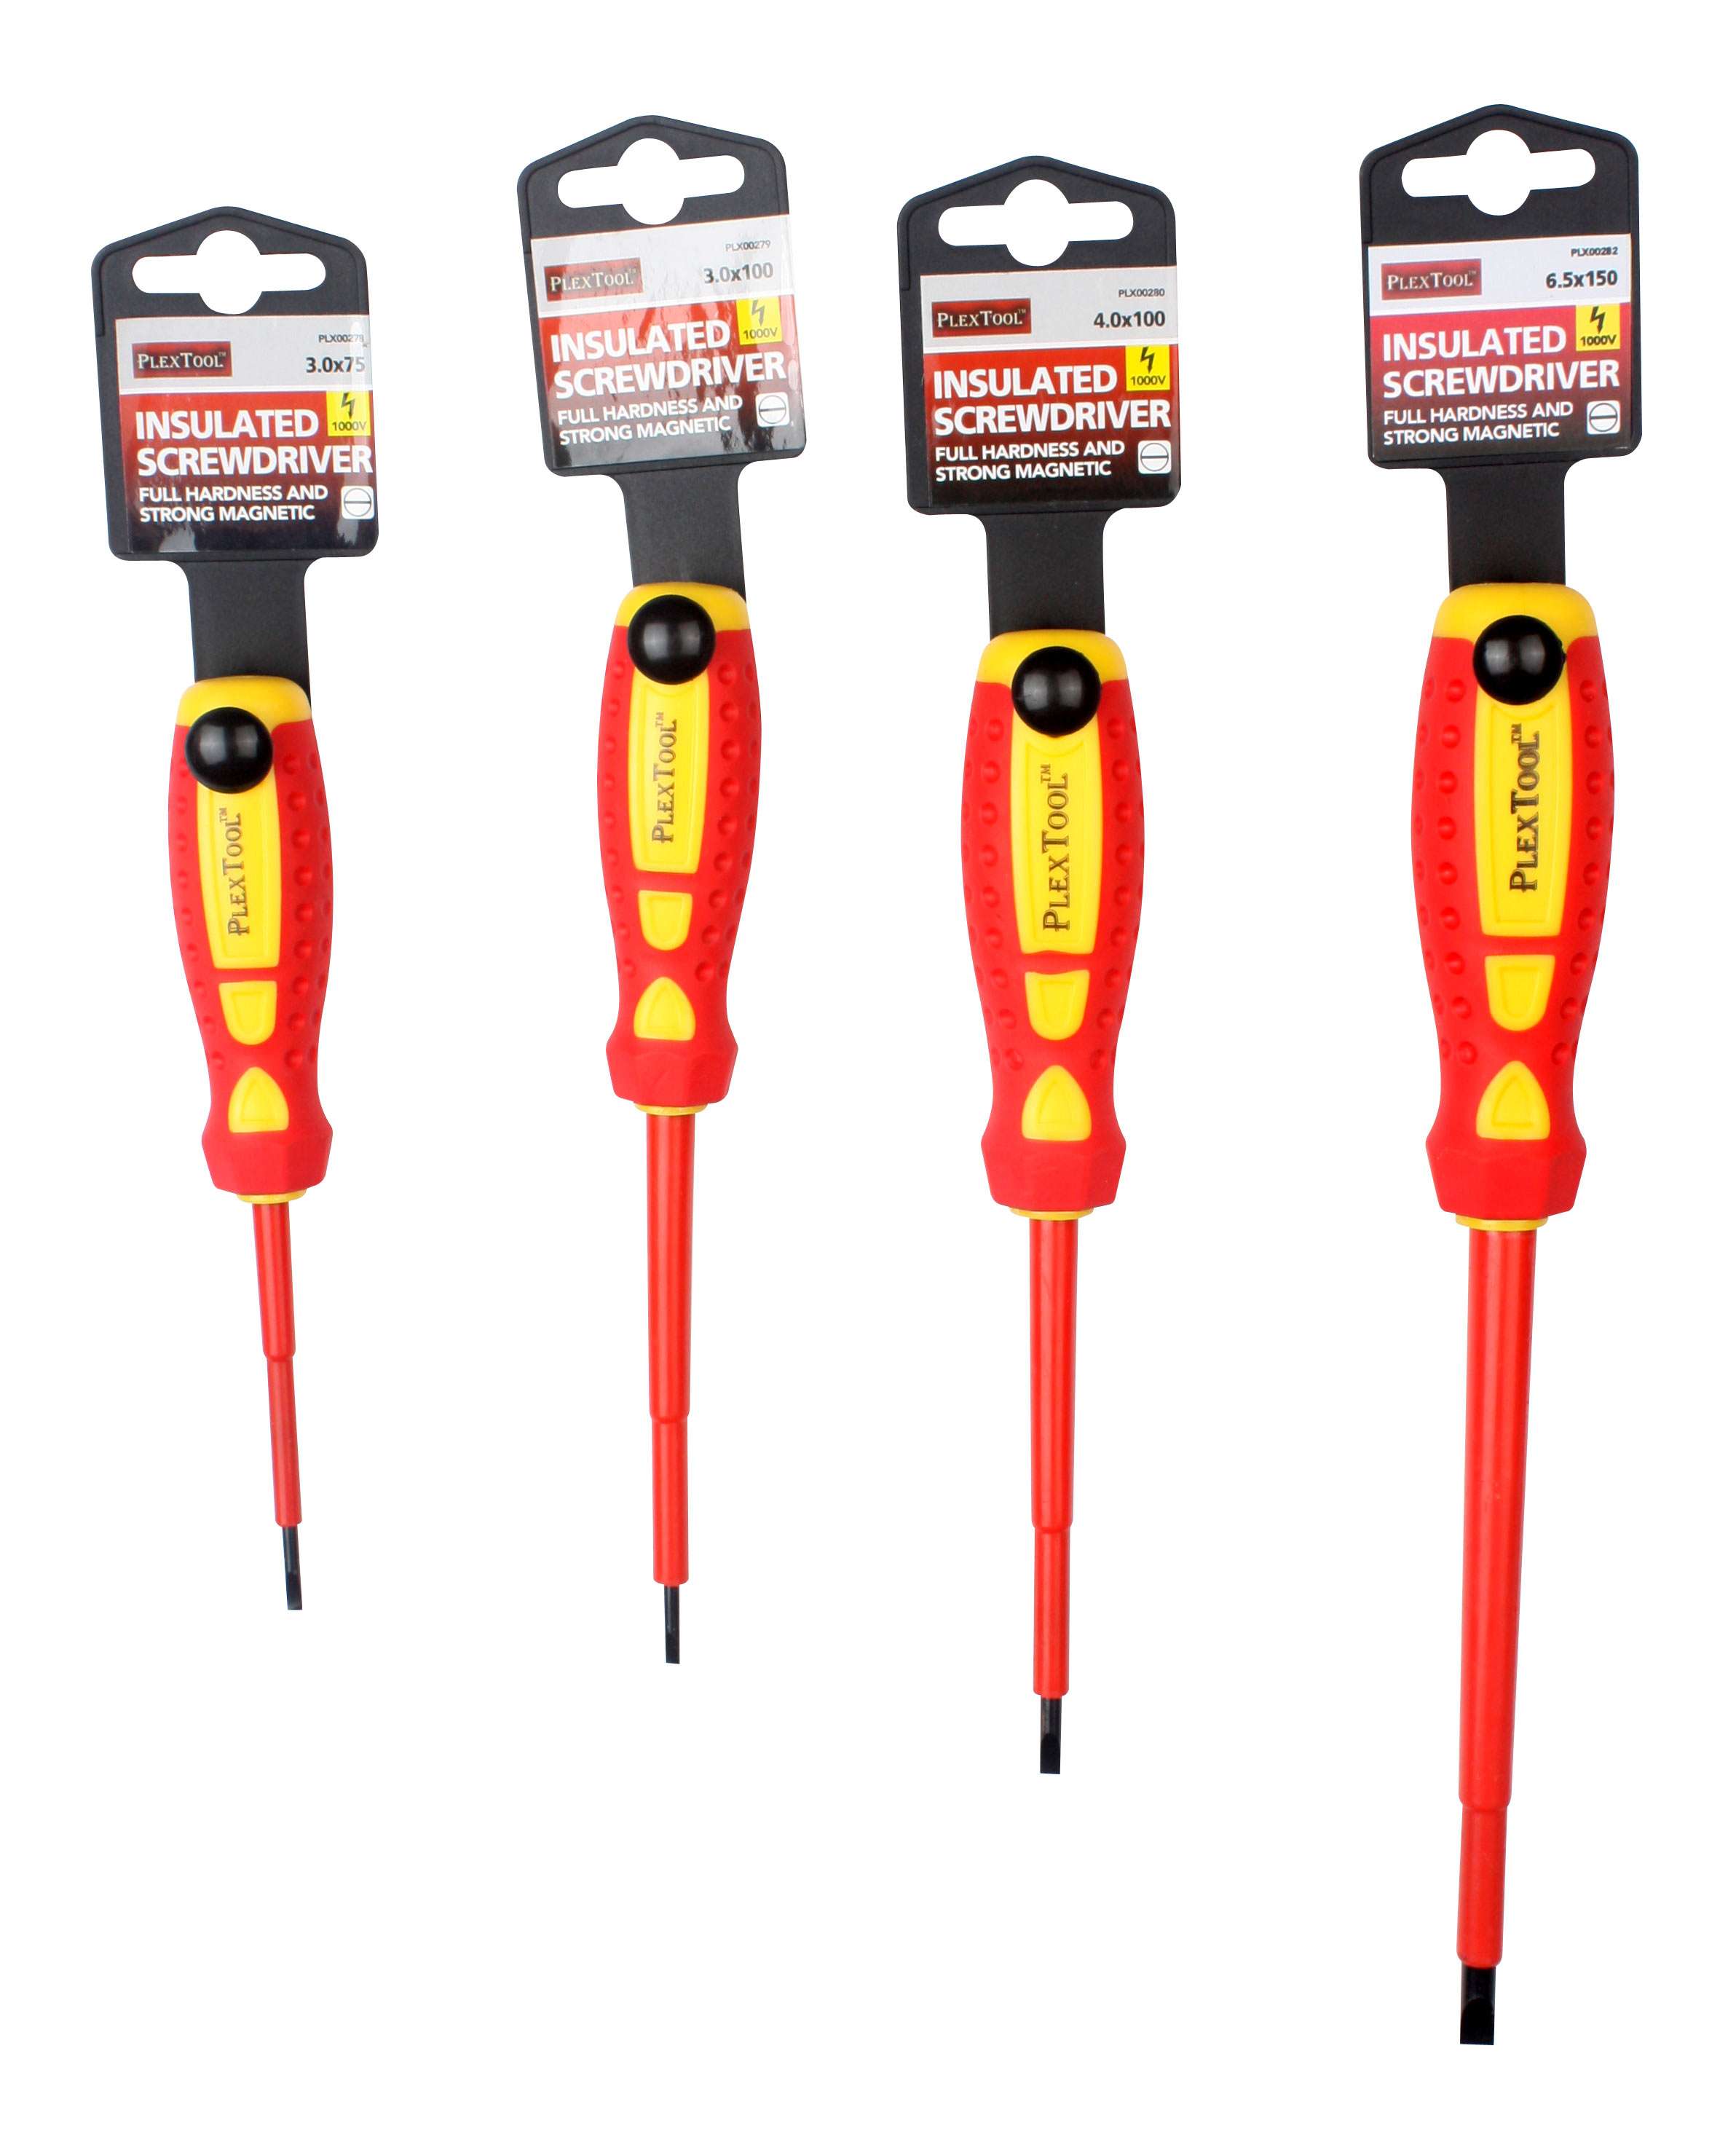 3"L x 1/8" Slotted Full Hardness Strong Magnetic Insulated Screwdriver - 1